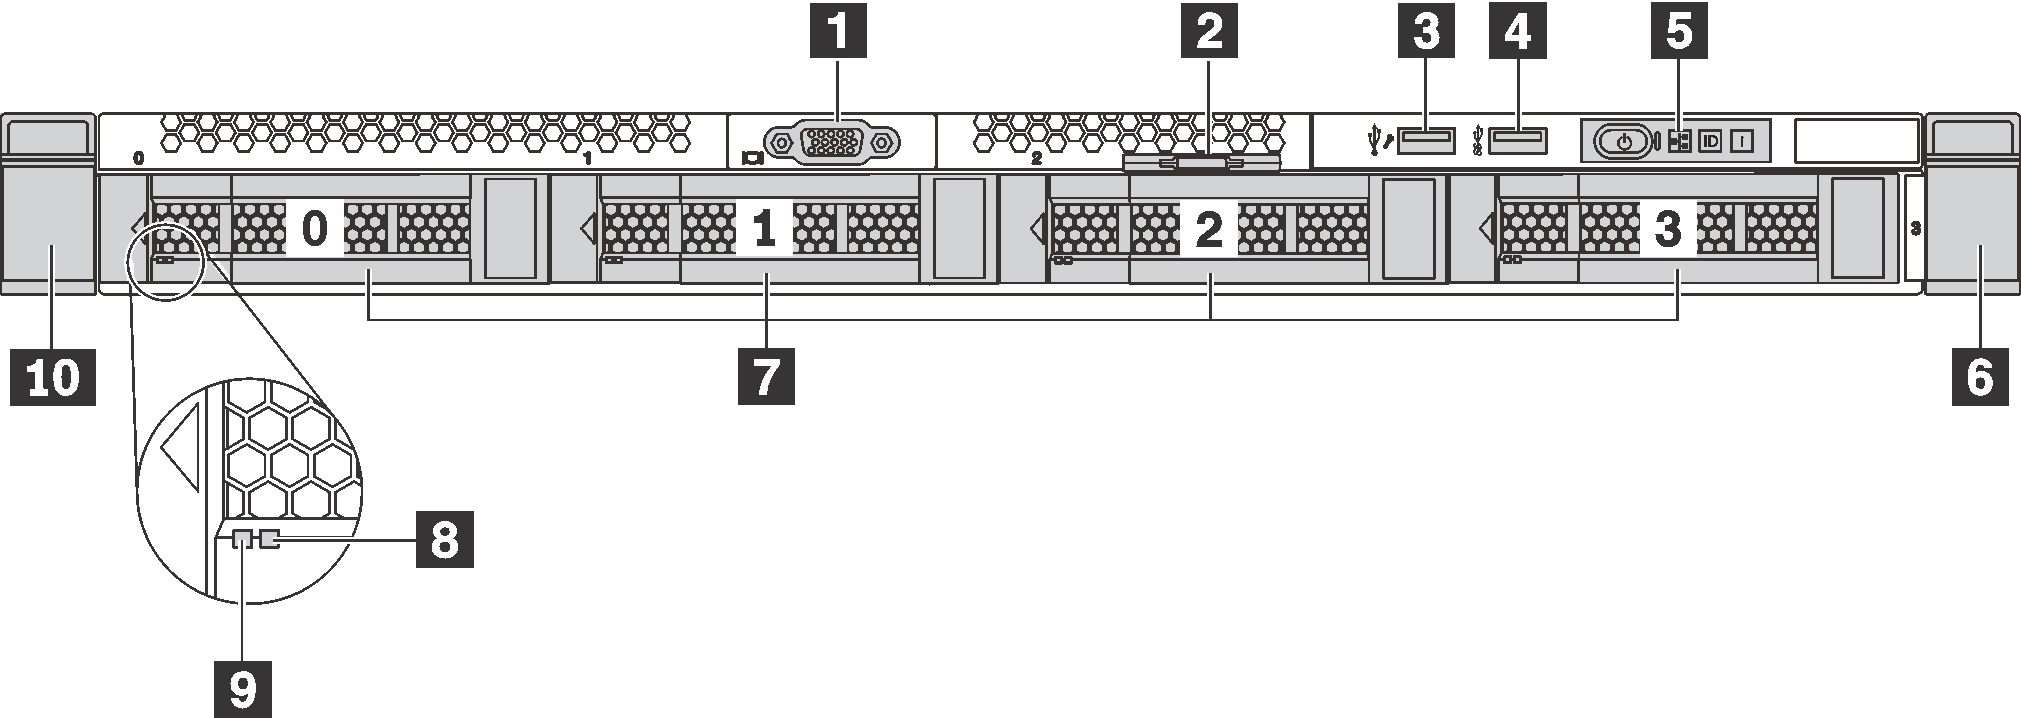 Graphic that depicts the front view of the server models with 3.5-inch drives. It includes callouts to identify each of the components.